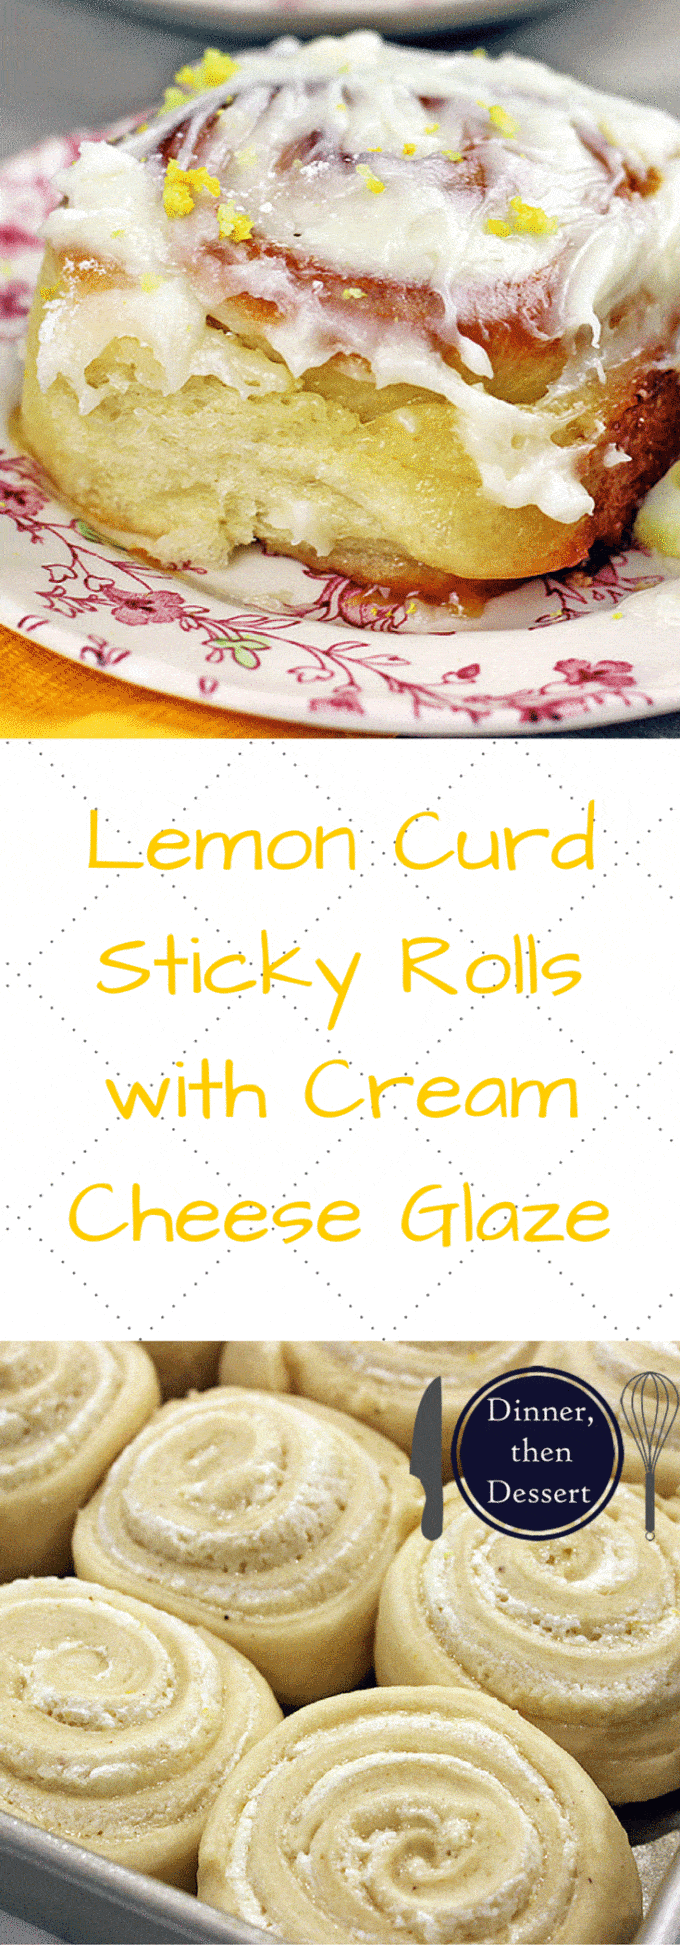 A delicious variation of a cinnamon roll, this lemon sticky roll will be an instant hit with your friends and family. Buttery dough filled with lemon curd and a lemony butter-sugar mixture, they are glazed with cream cheese frosting.